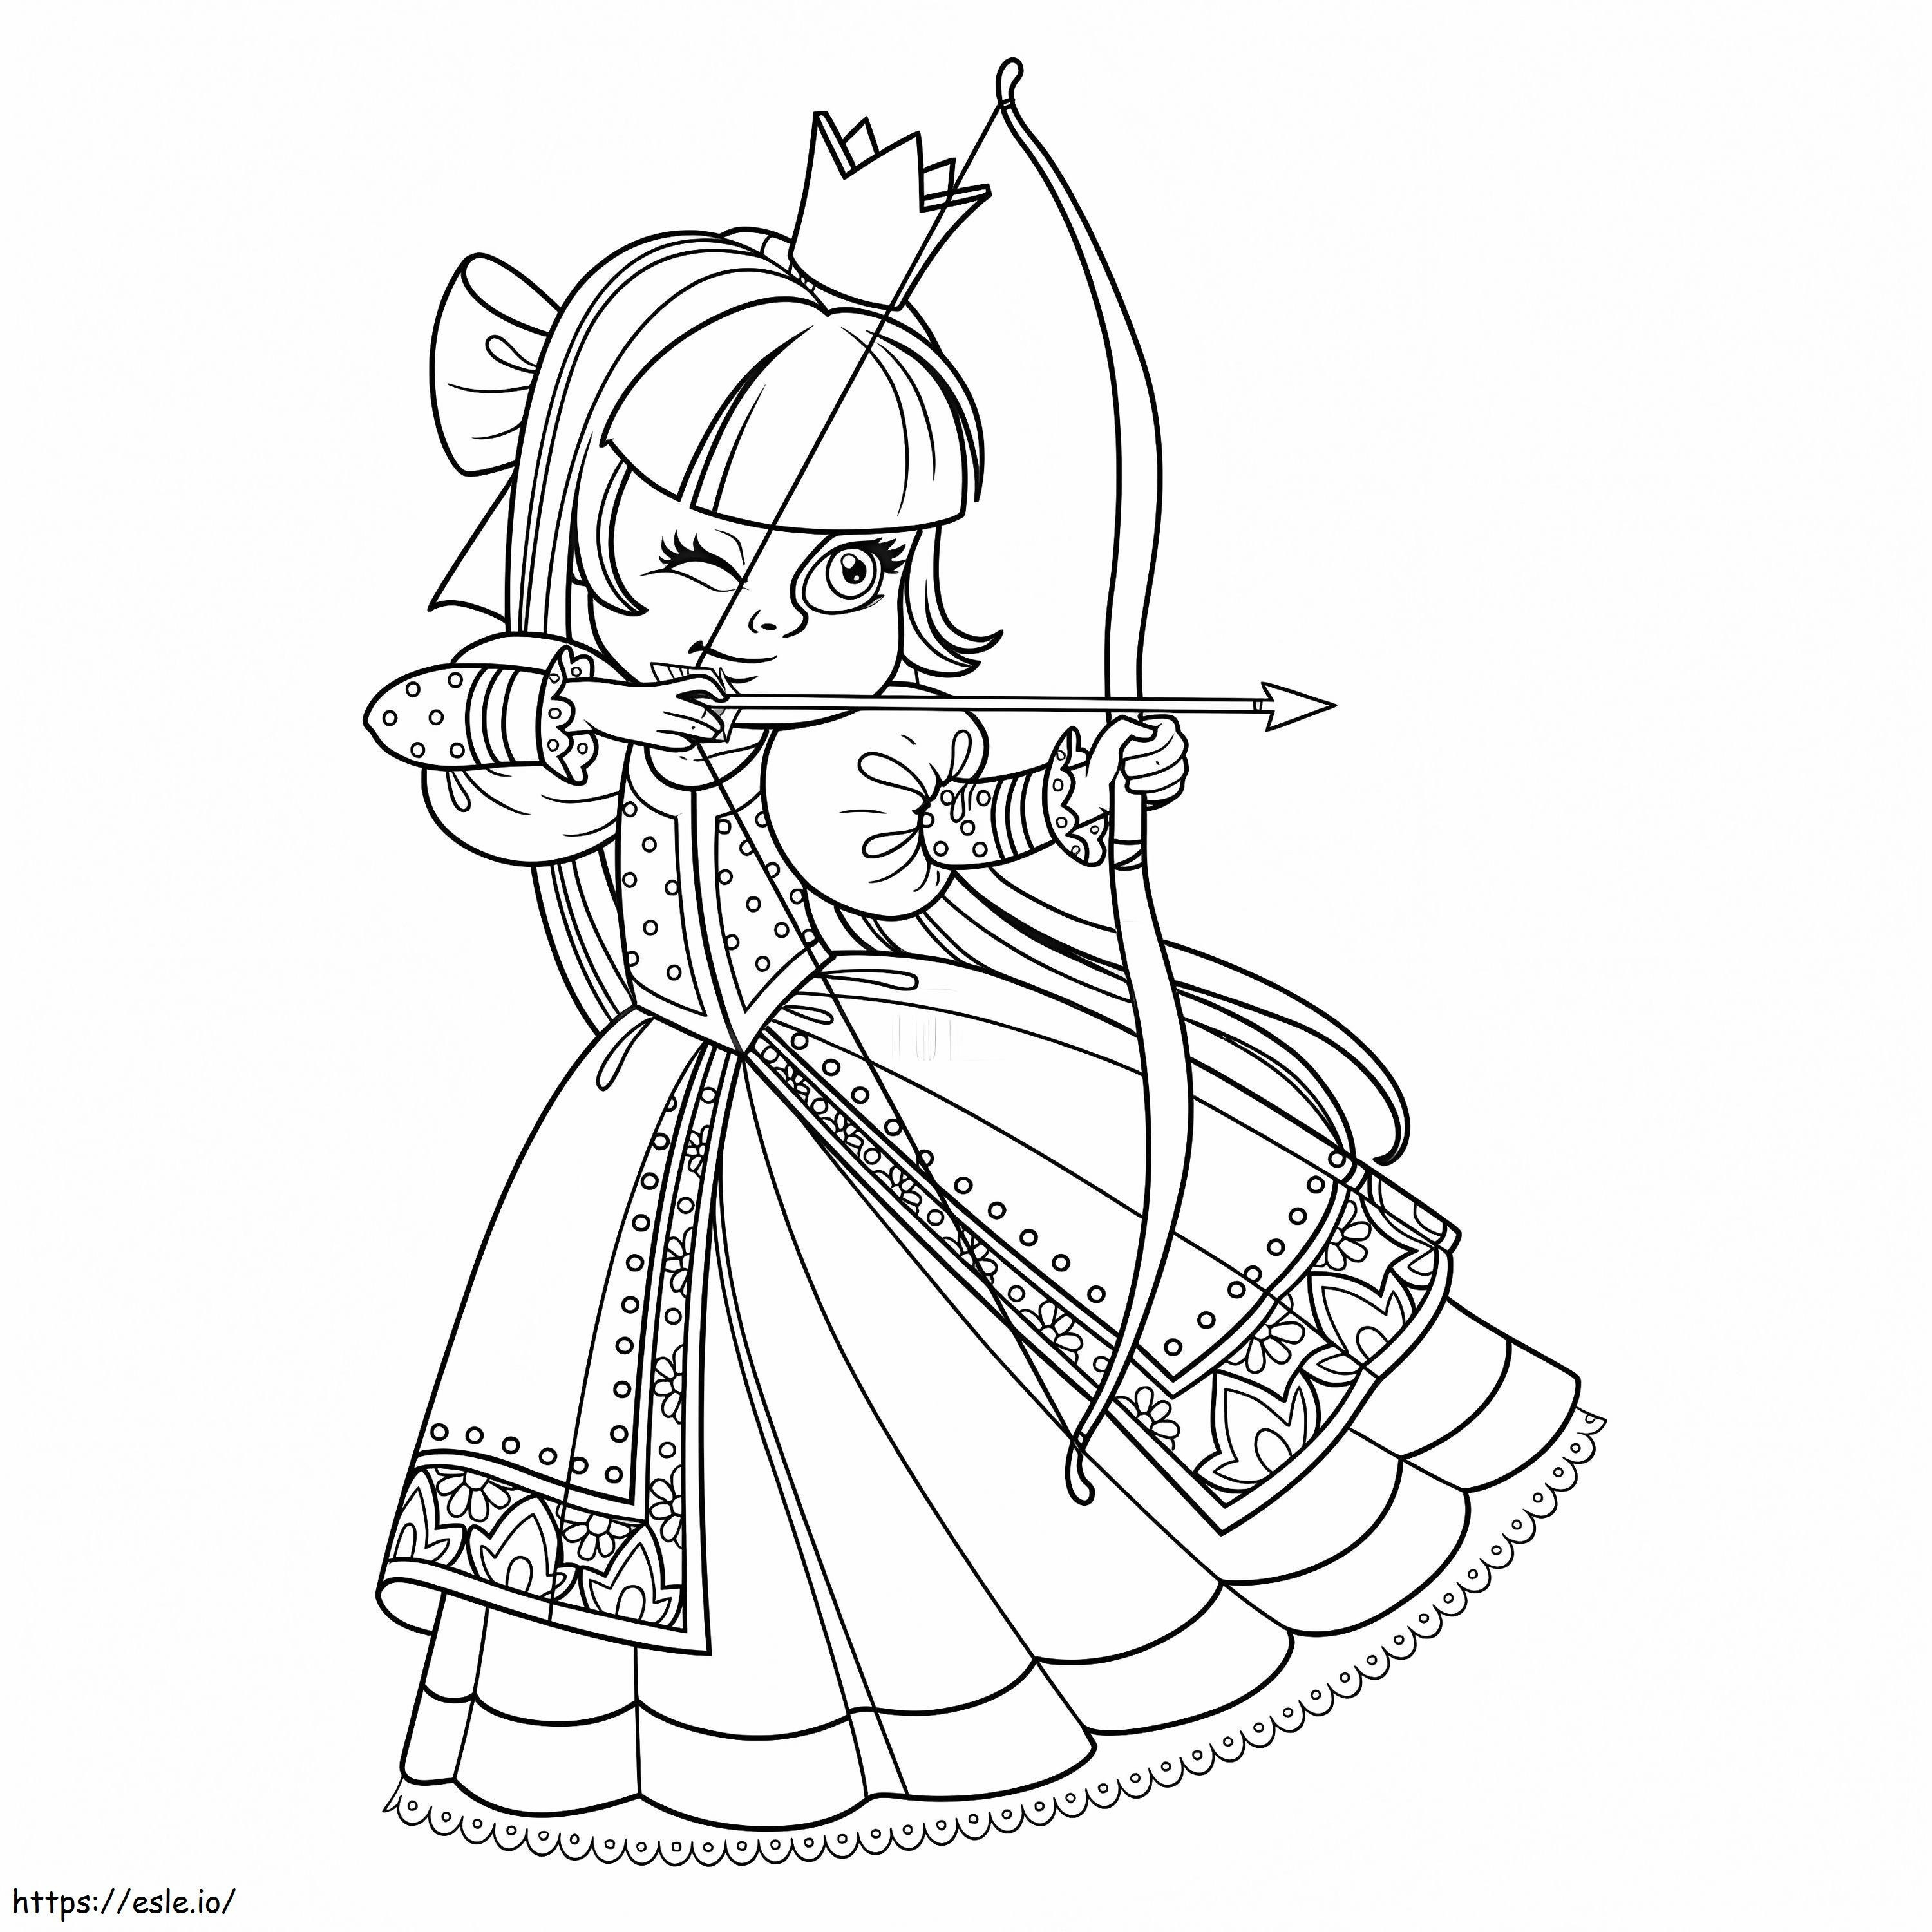 Great Archery coloring page